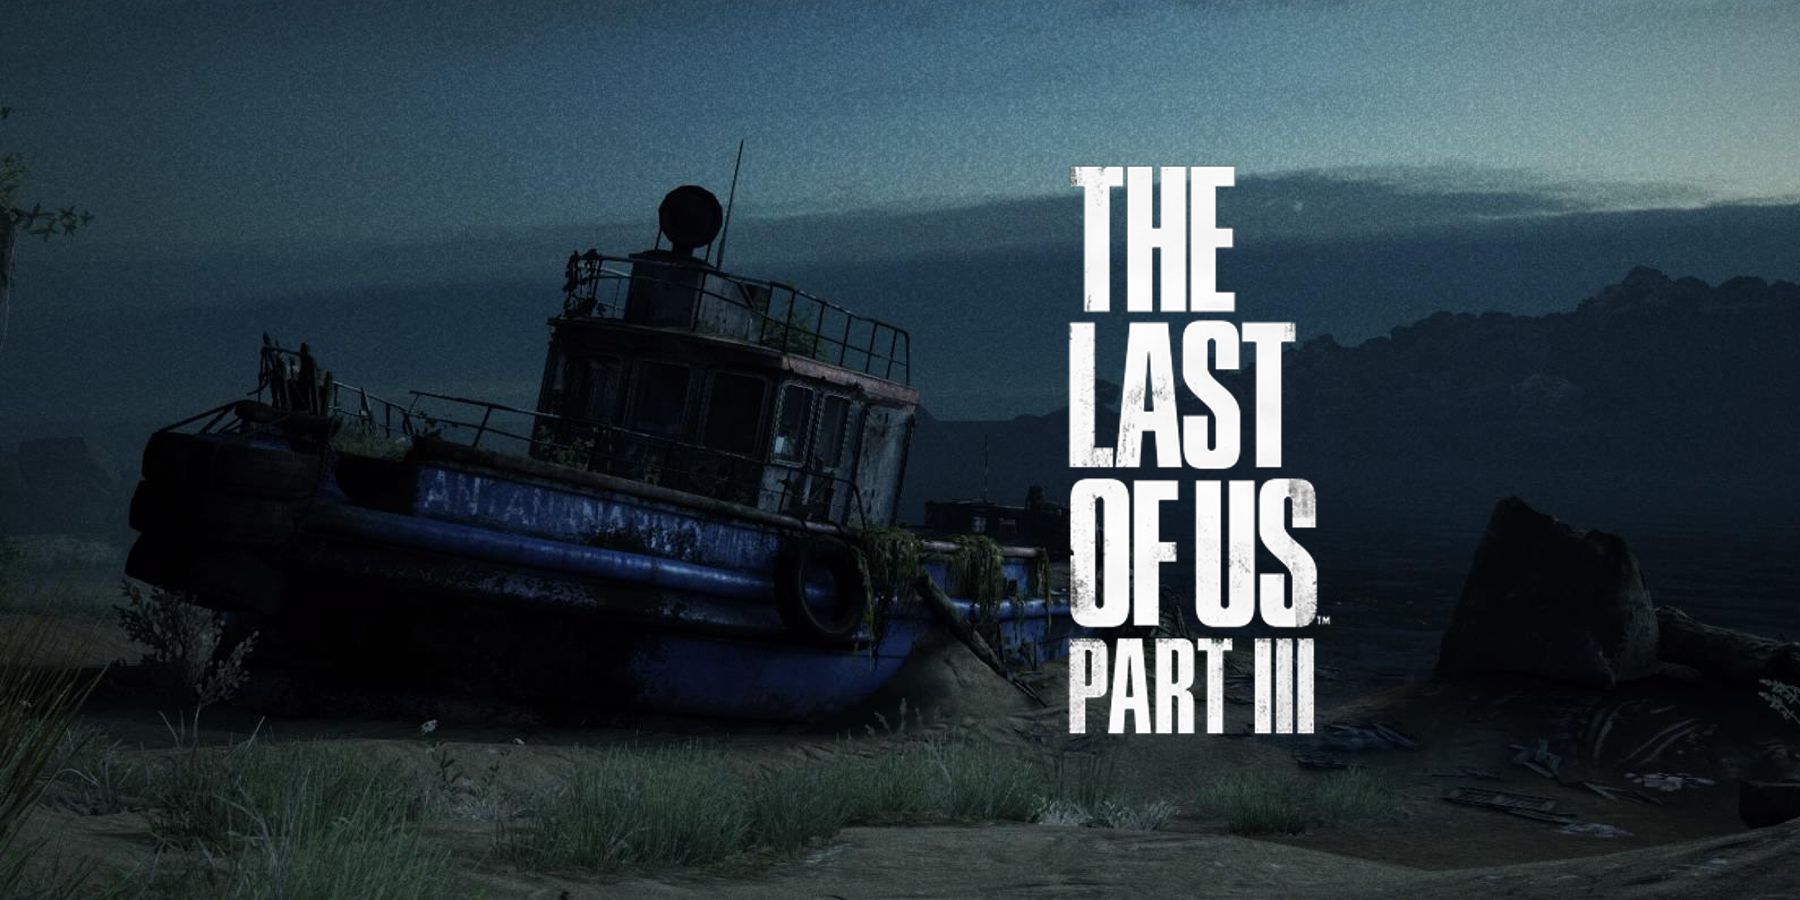 The Last of us Stranded Boat Part 3